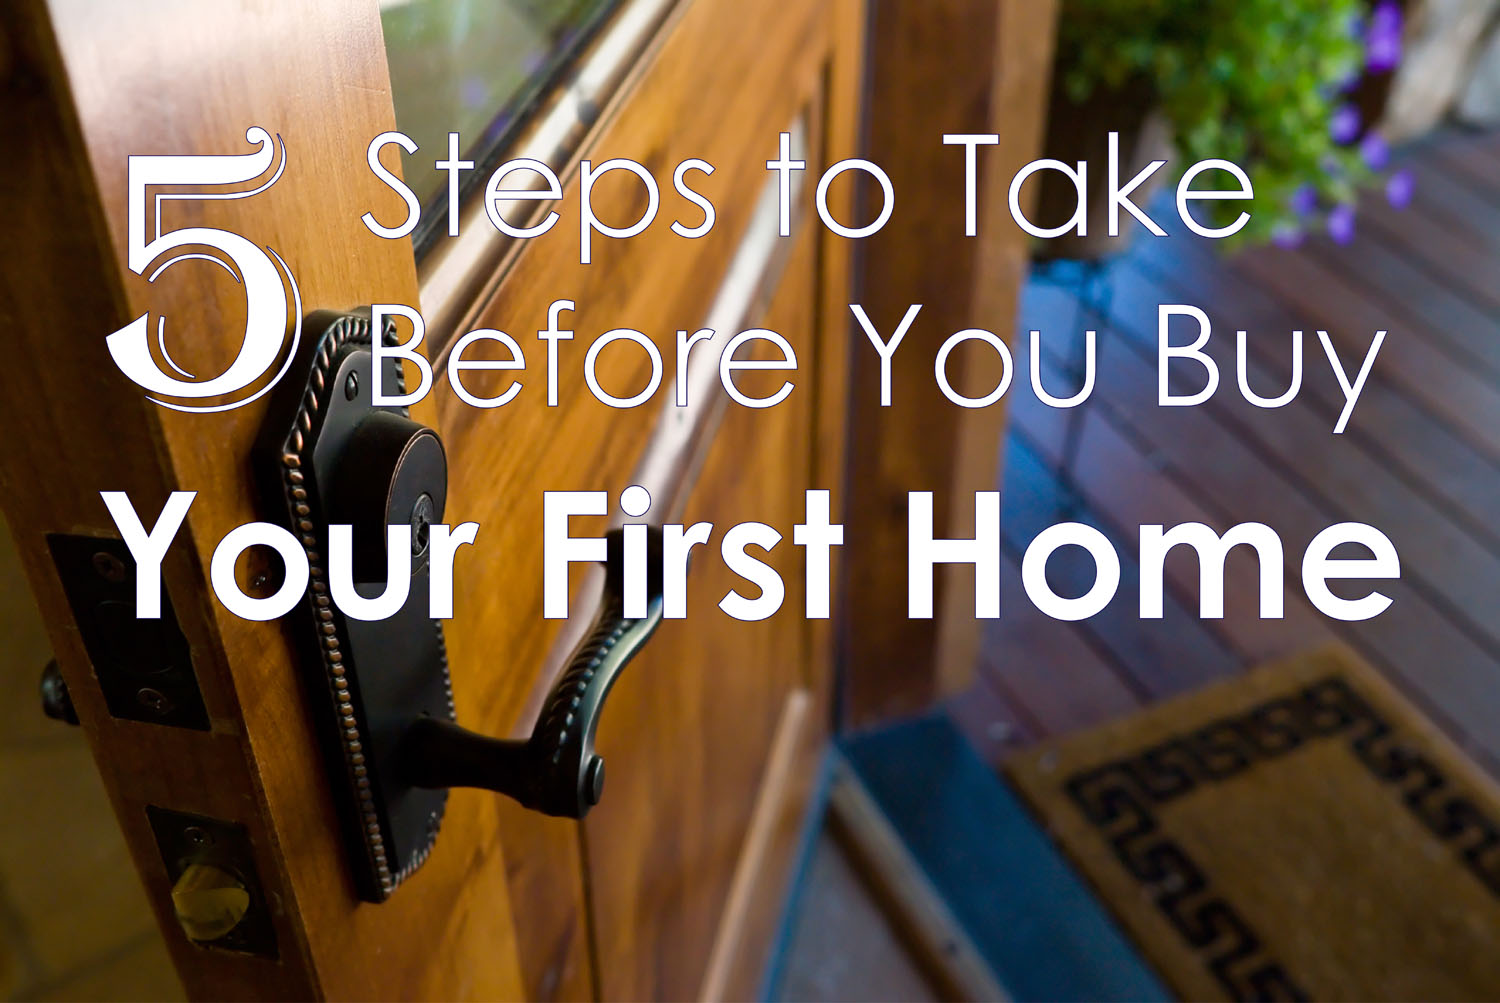 5-steps-to-take-before-you-buy-your-first-home